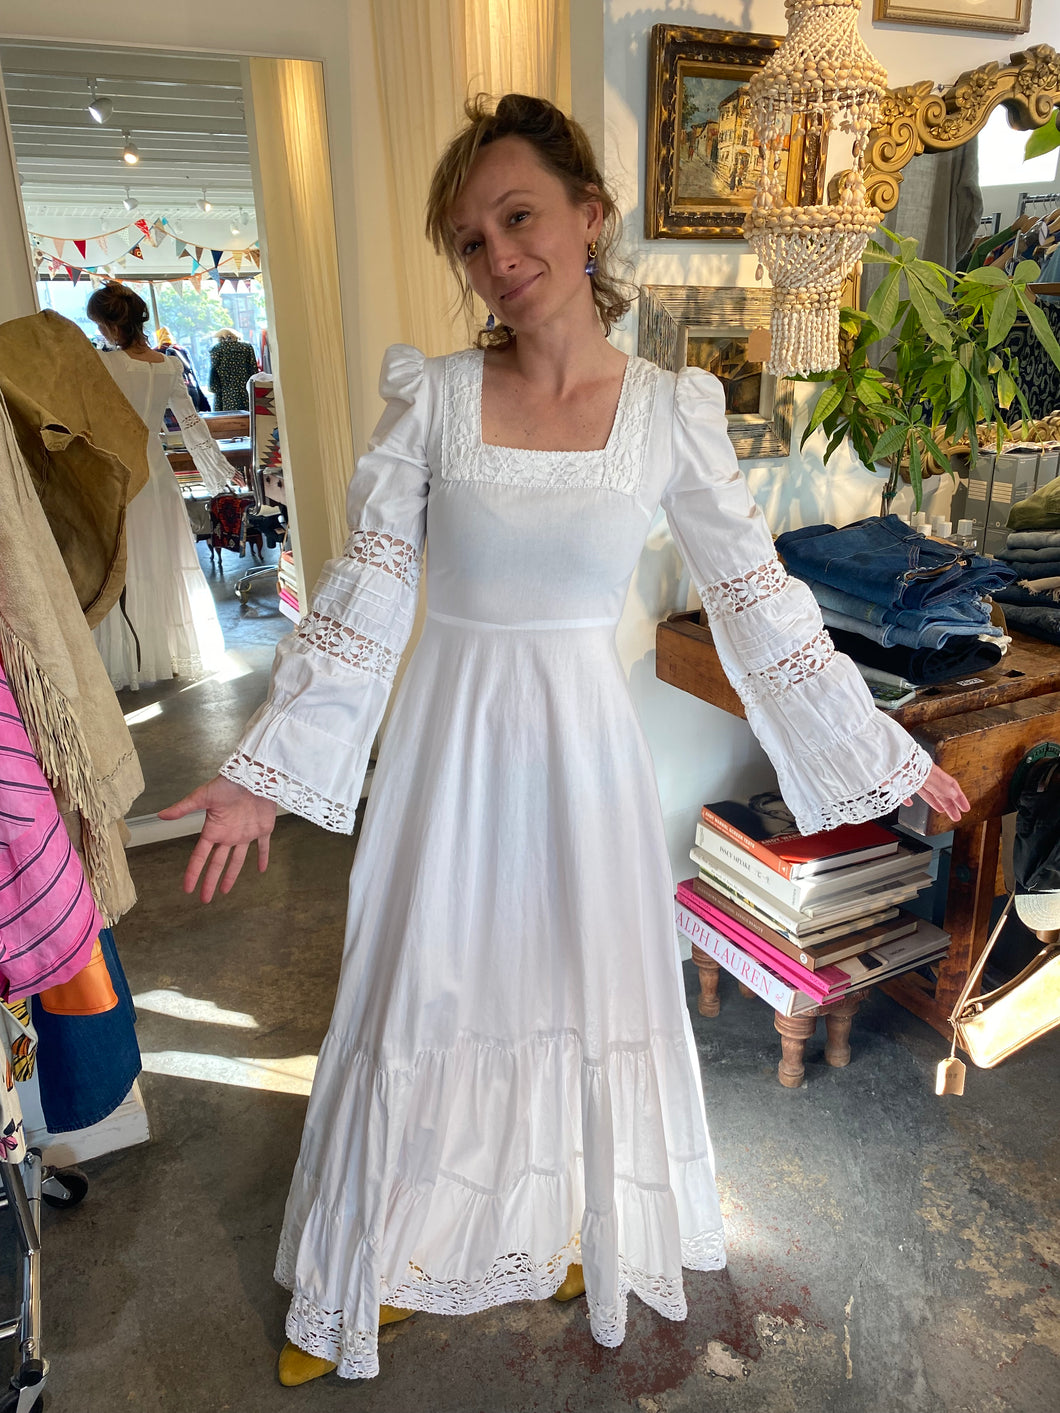 Very Early Vintage Laura Ashley Wedding Dress - The Curatorial Dept.